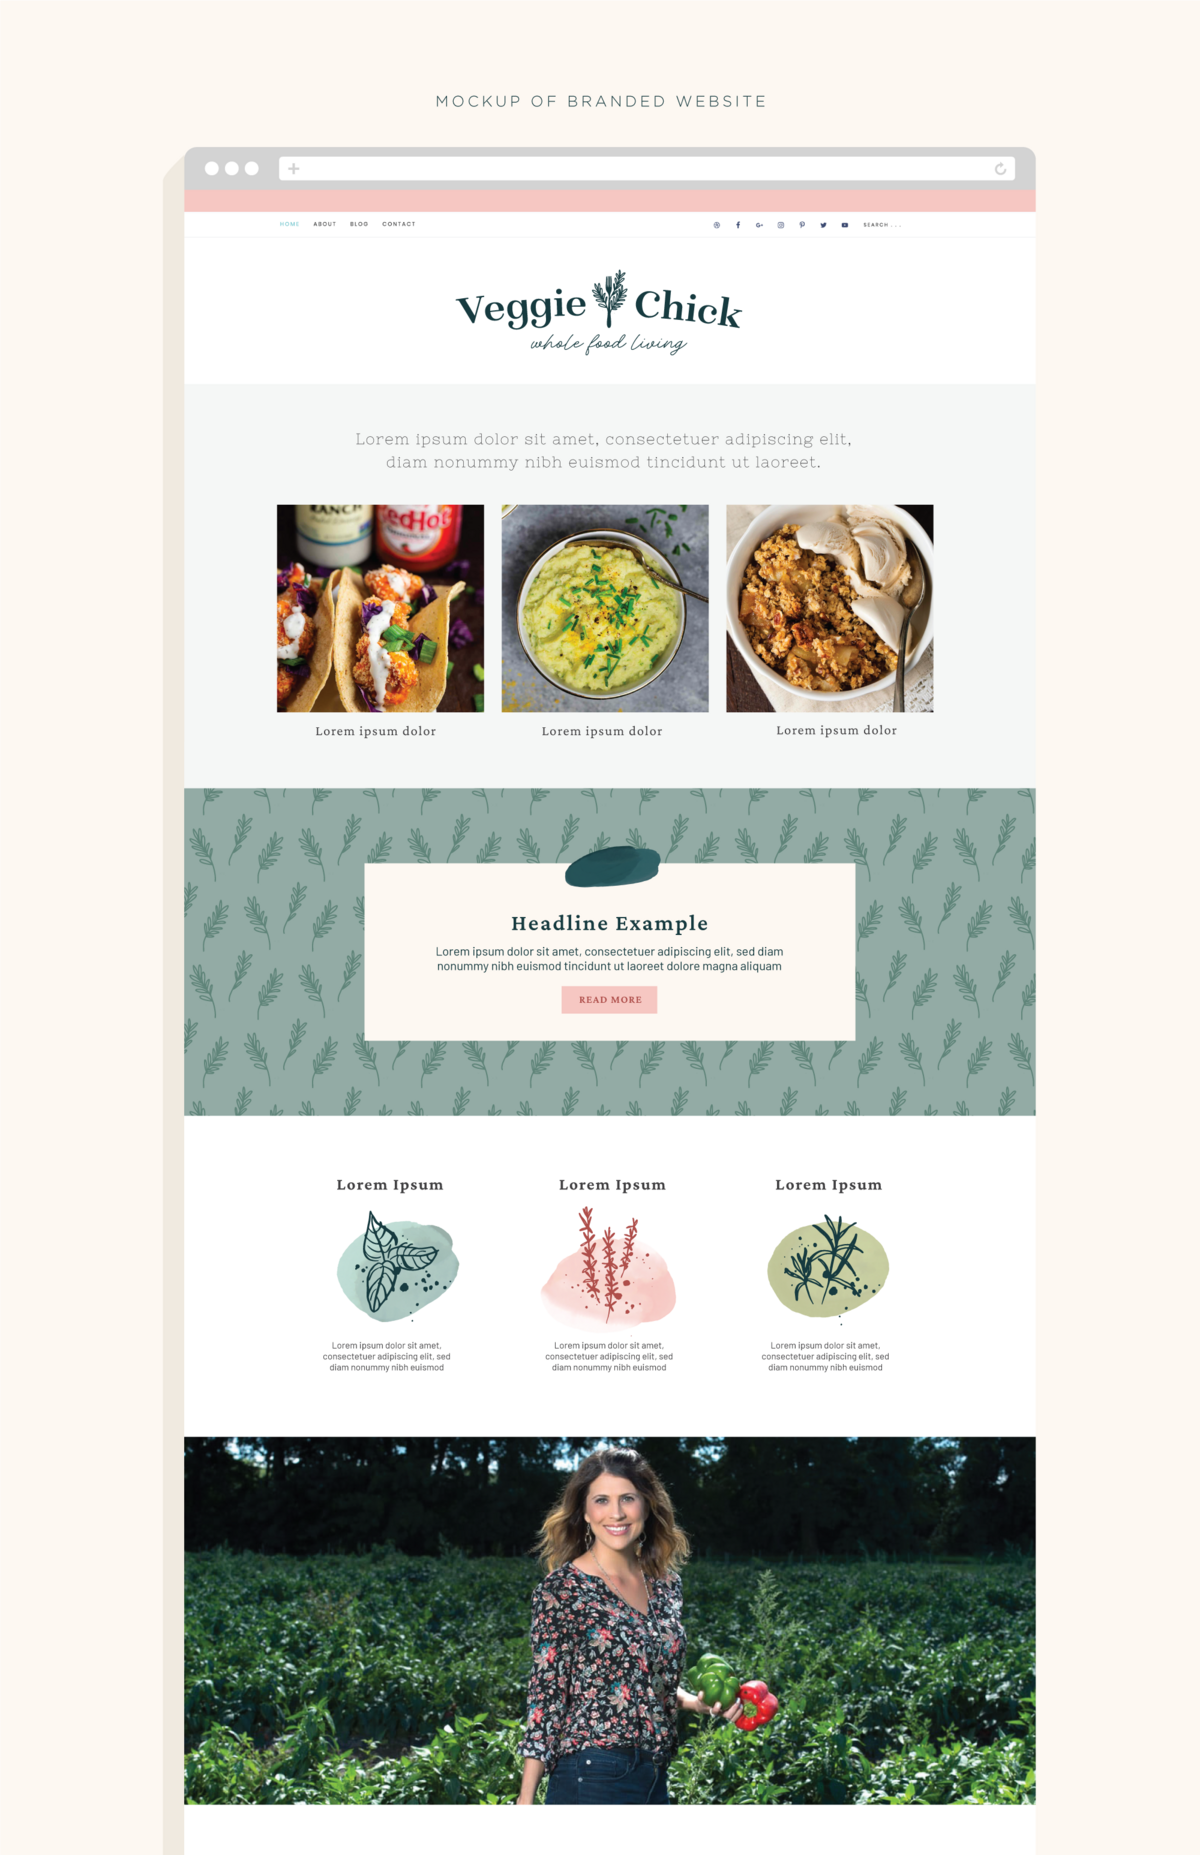 Mocked up how a branded website could look like for Veggie Chick. Shows how to use a brand pattern and the custom illustrations.